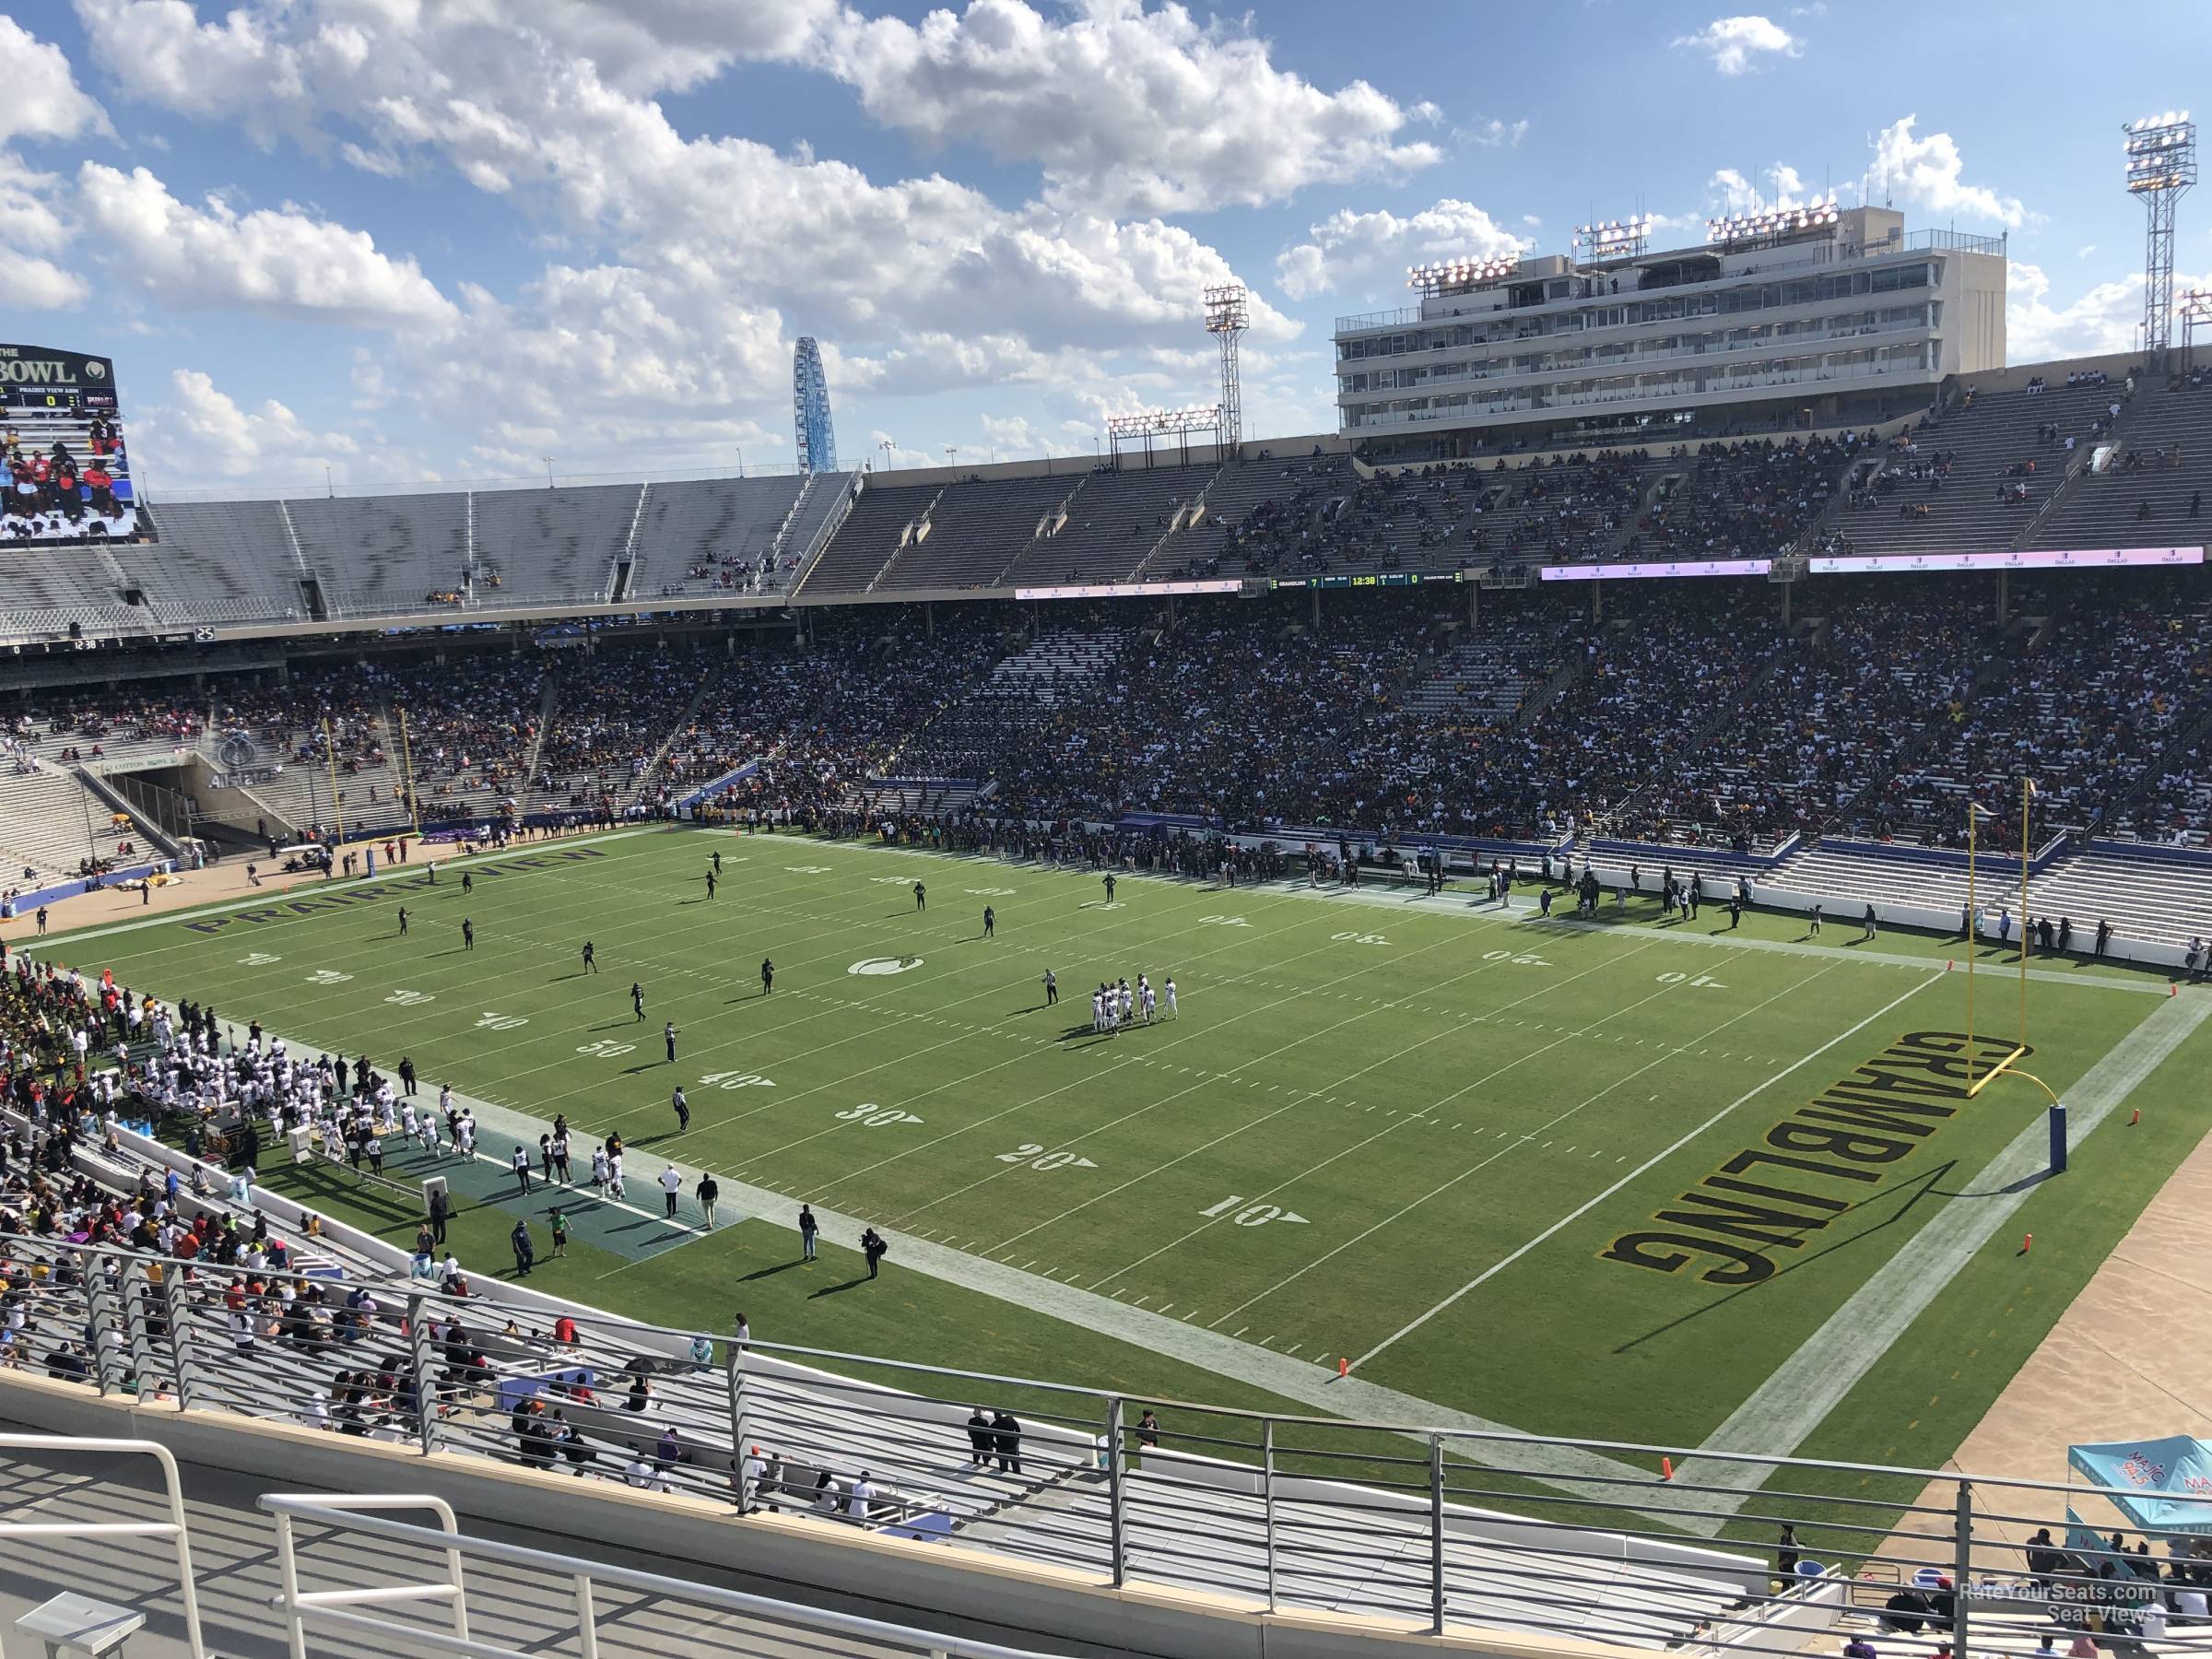 section 122, row 8 seat view  - cotton bowl